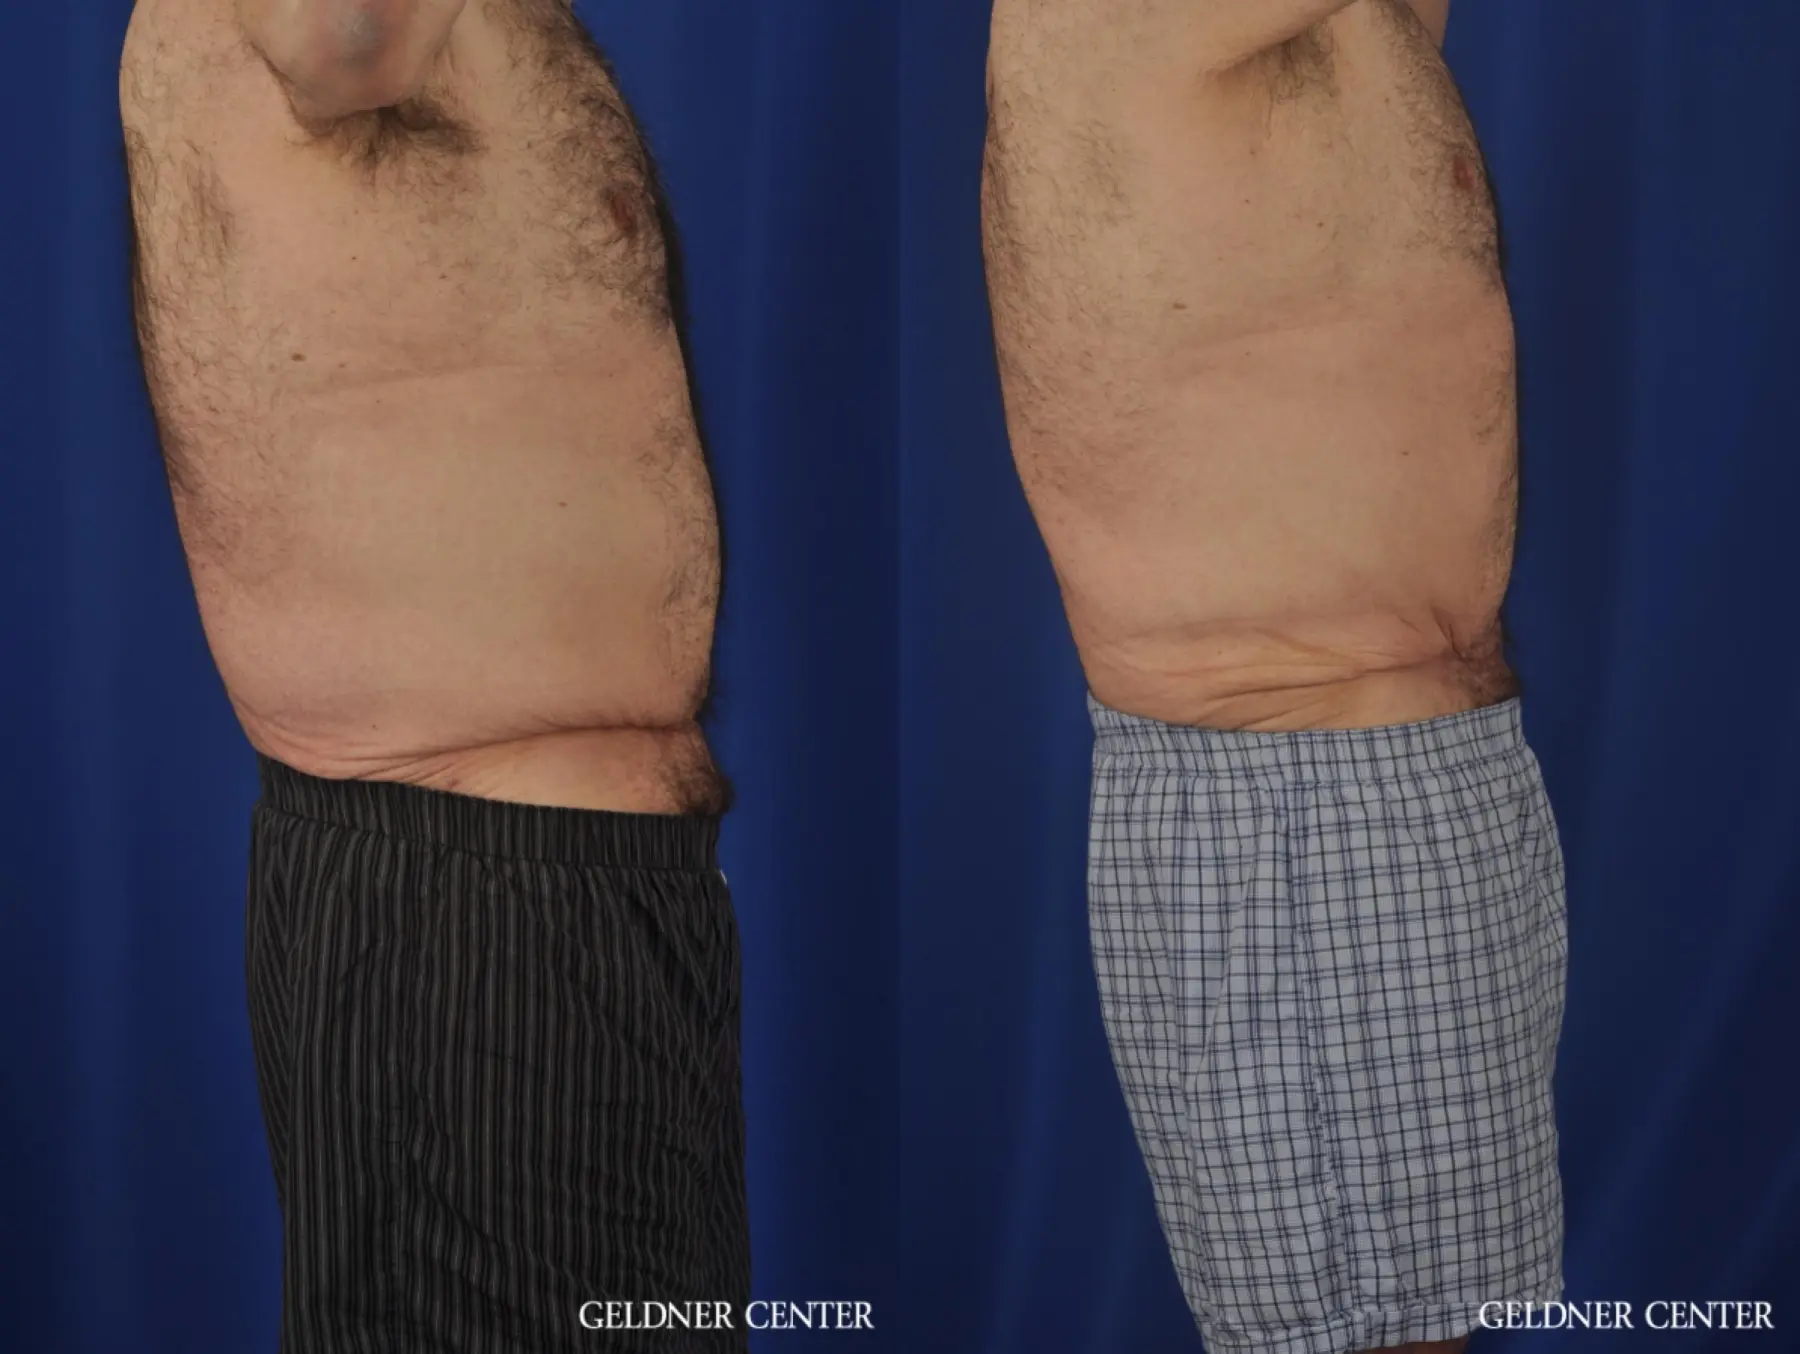 Liposuction For Men: Patient 11 - Before and After 3